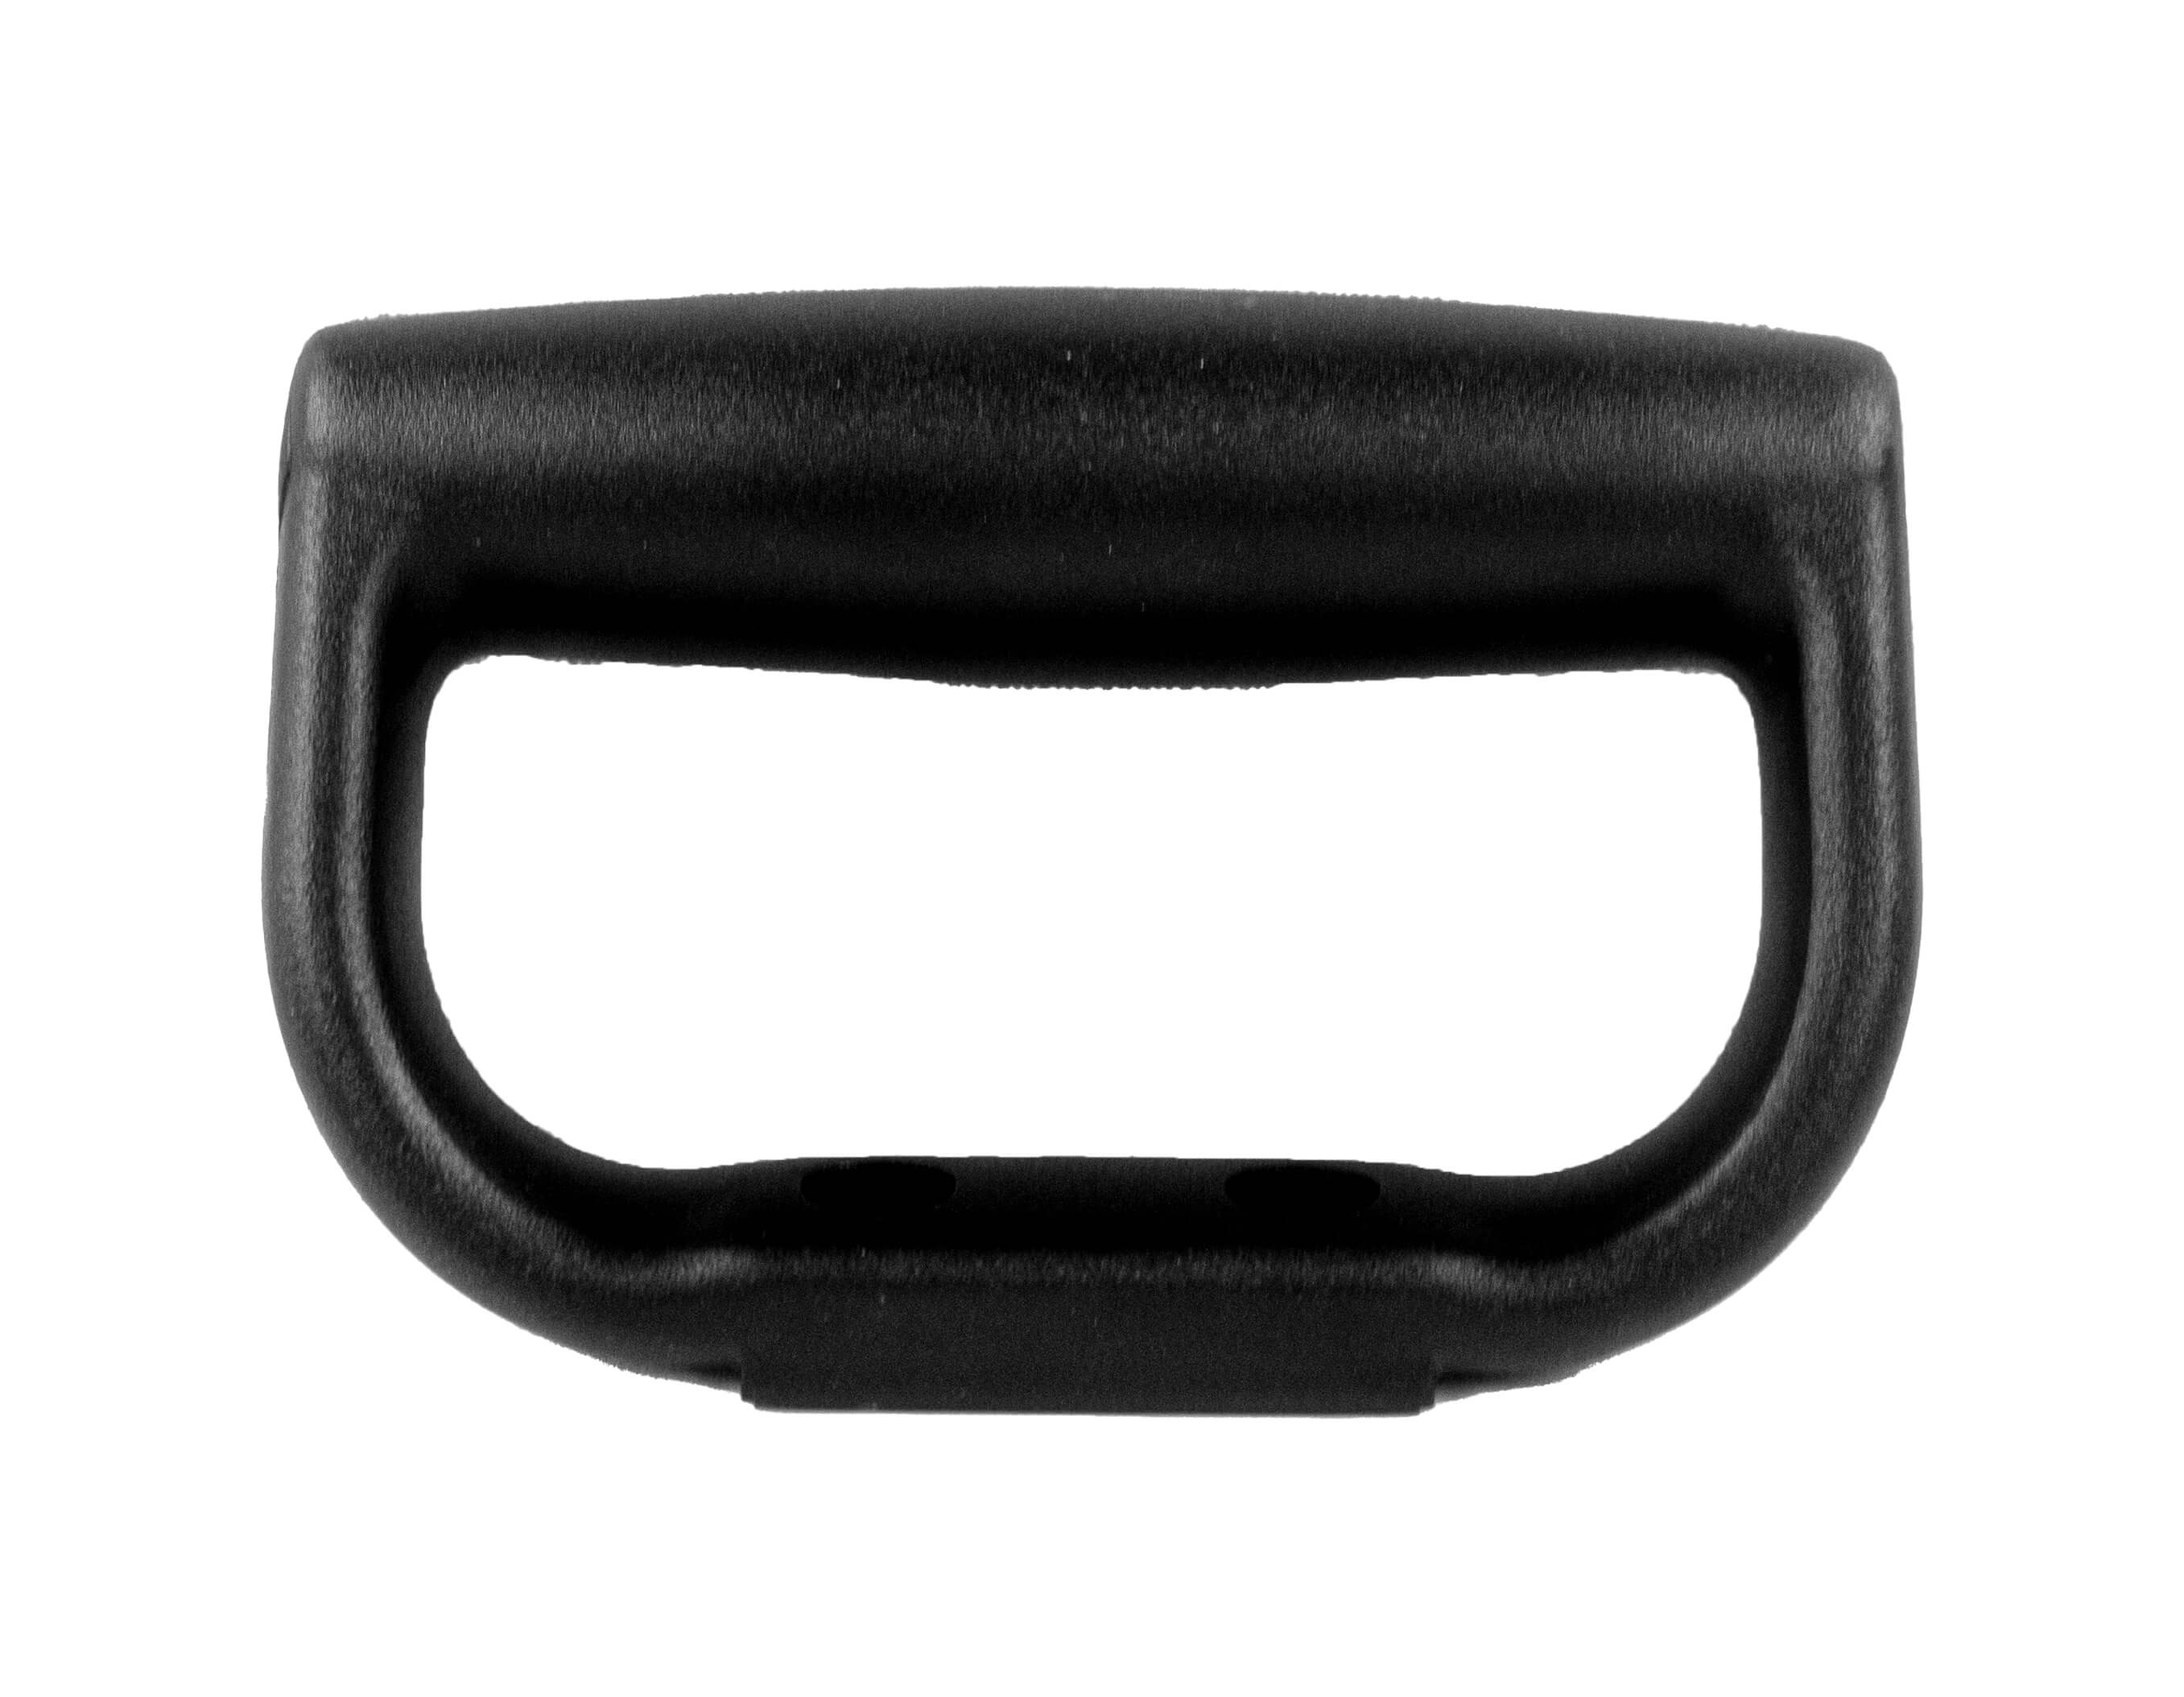 1INCH IMPACT REPLACEMENT HANDLE FOR 703.3260